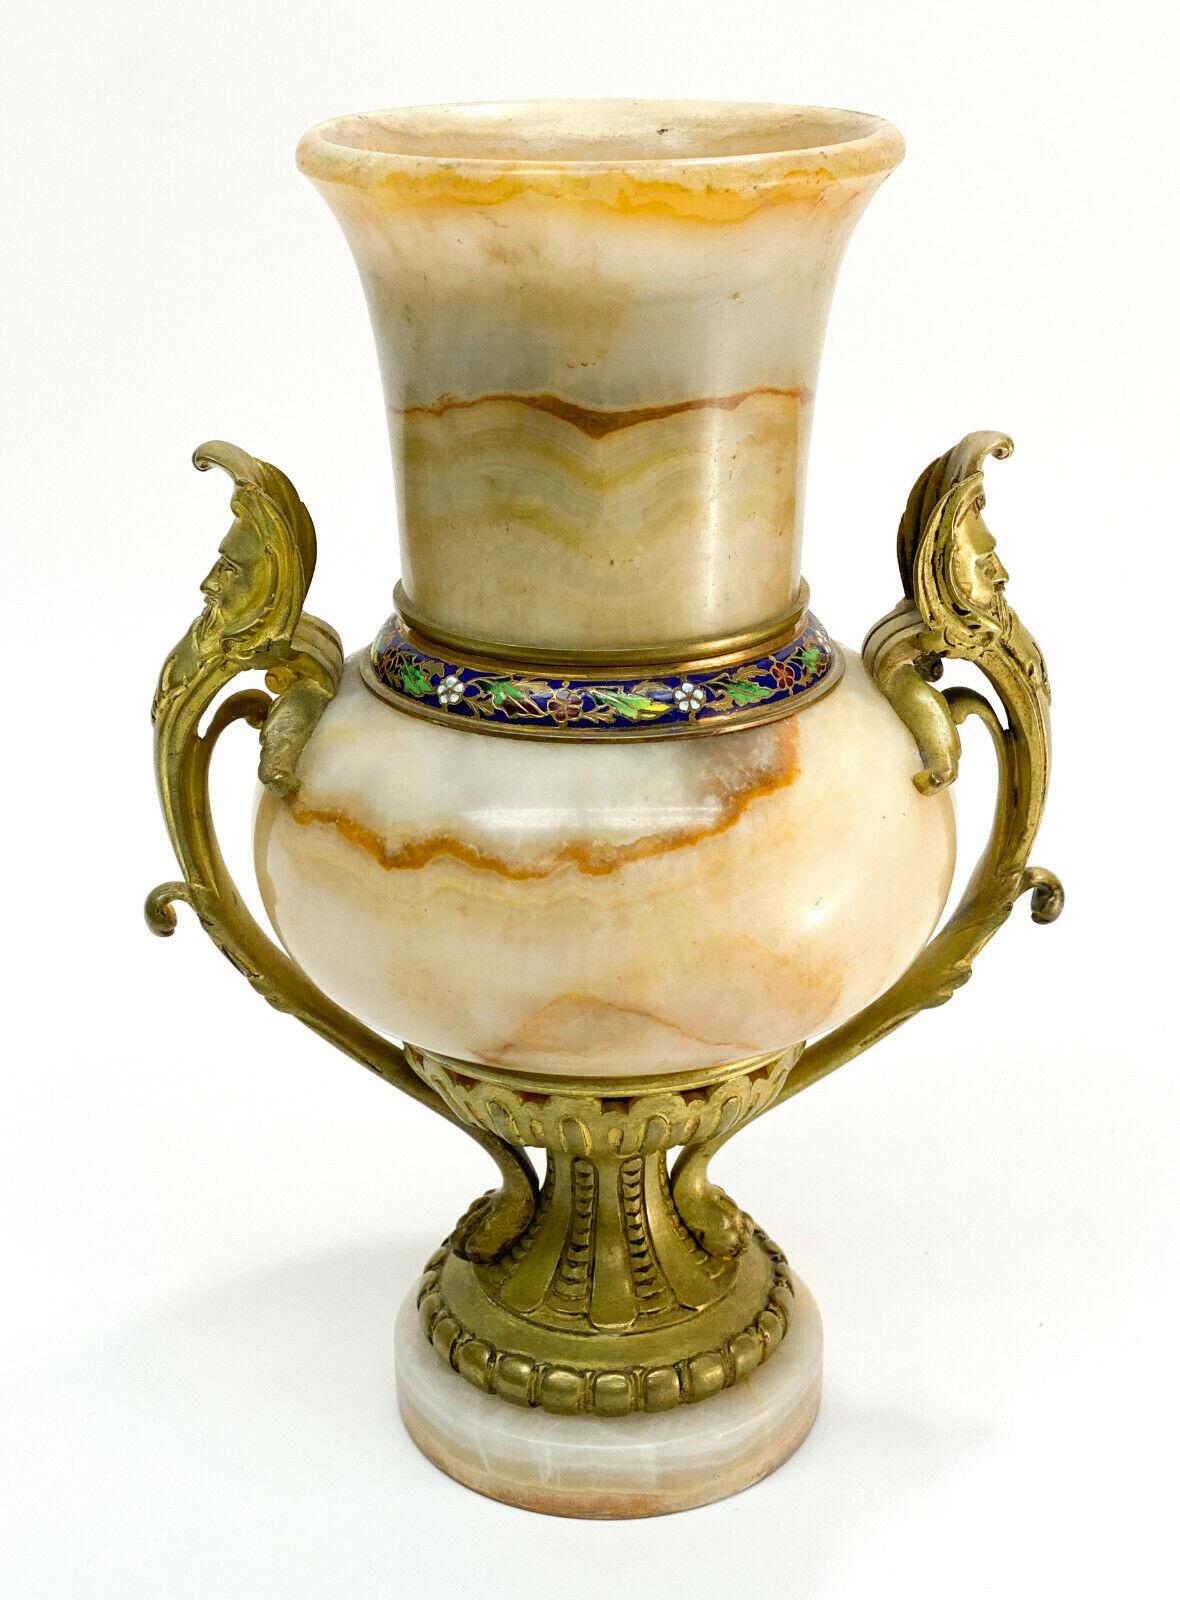 French Champleve Enamel and Beige onyx stone bronze Mounted Urn, 19th century

Blue and floral champleve enamel to the circular band connecting the neck to the body. Gilt bronze mounts to the figural twin handles and stem.

Additional